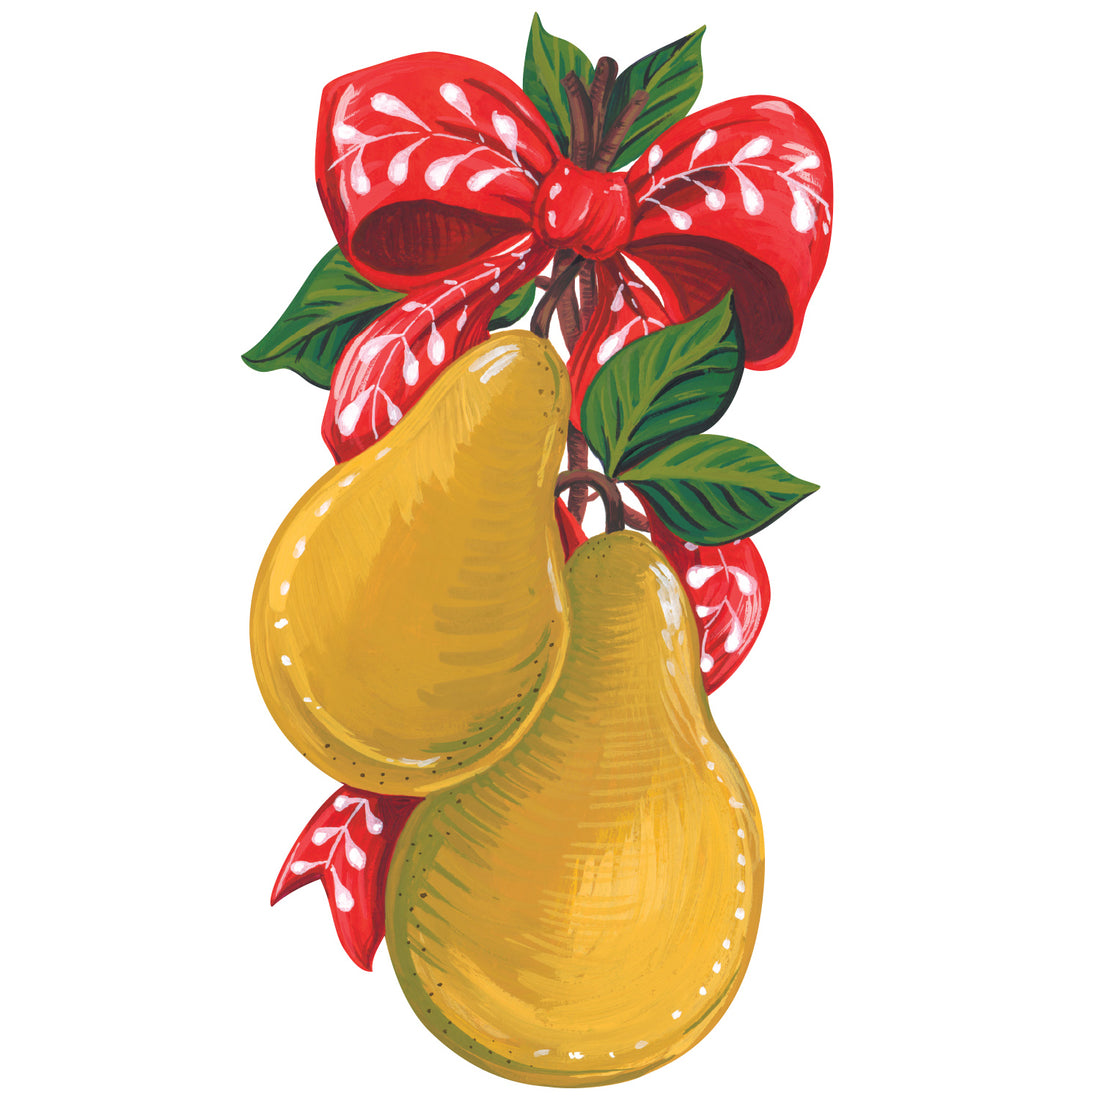 A die-cut illustration of two yellow pears tied by the stems with a red ribbon with white accents. 